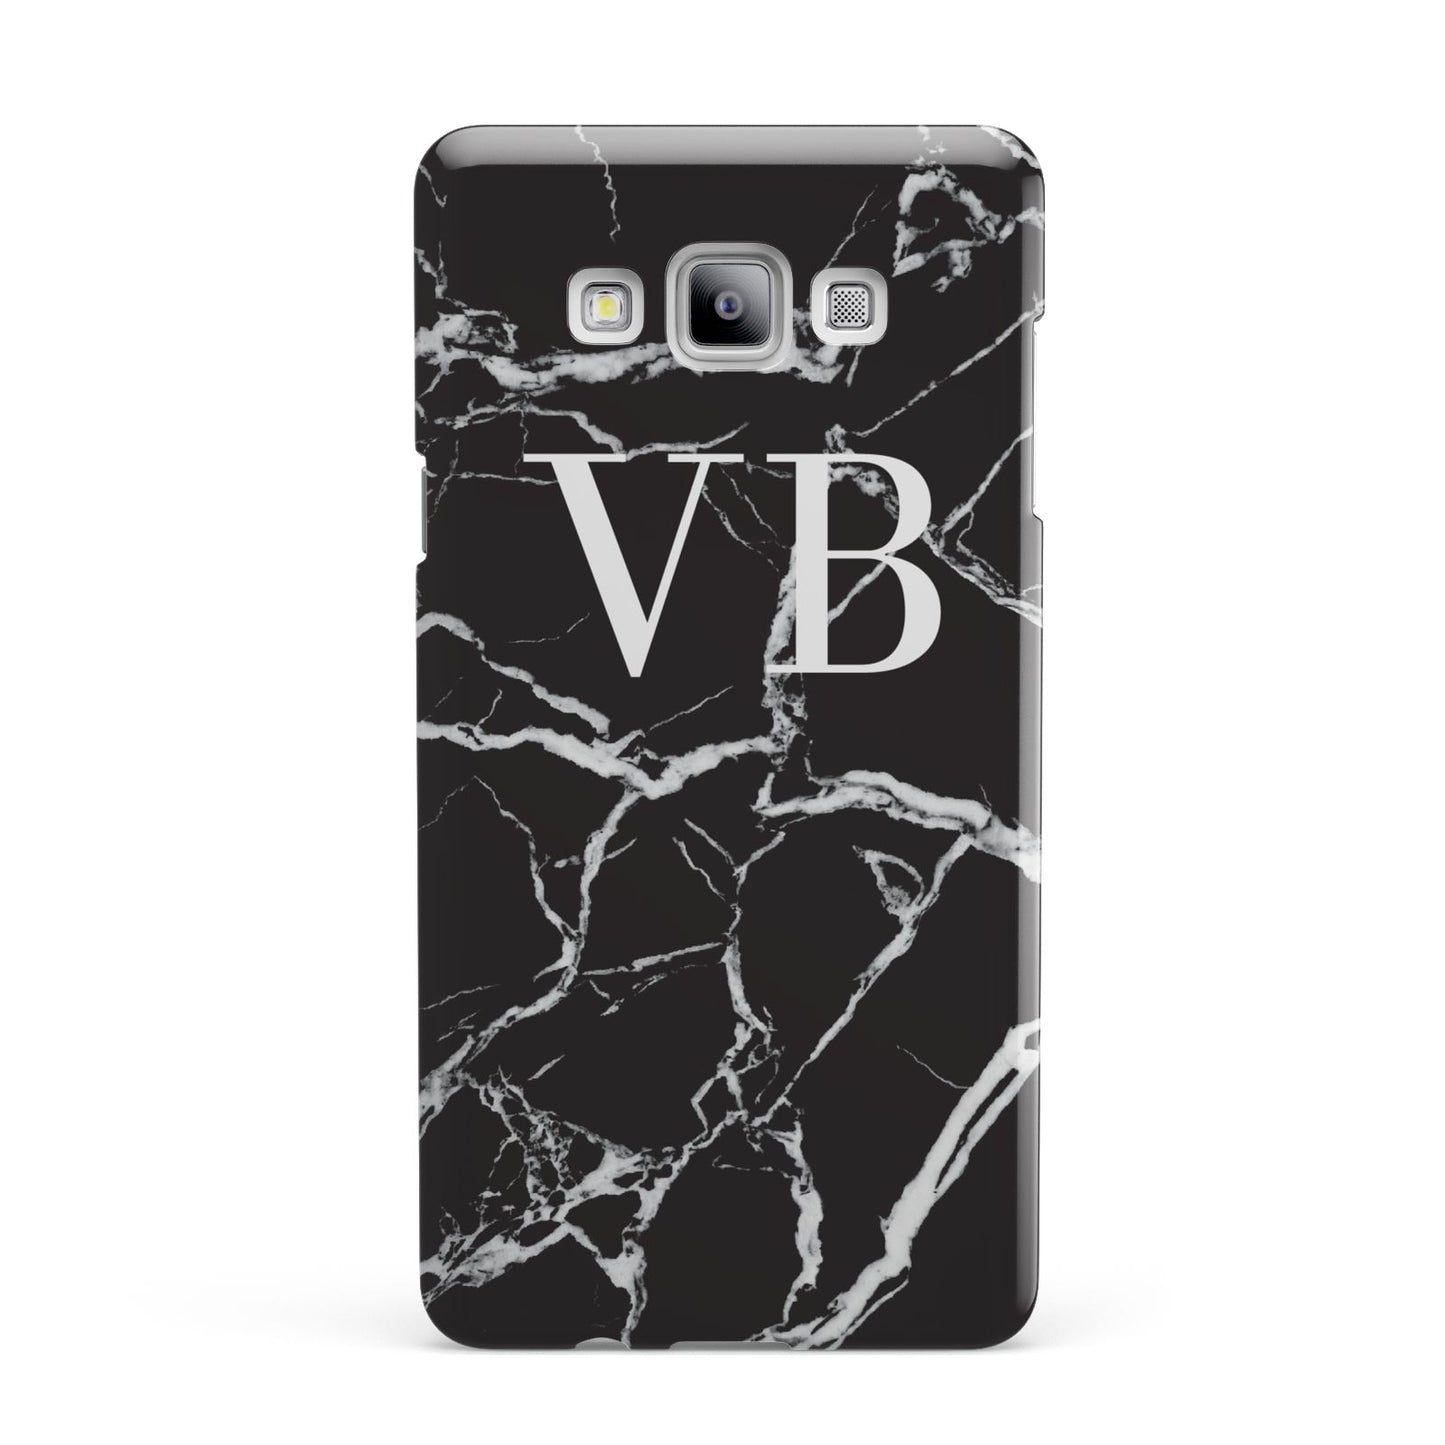 Personalised Black Marble Effect Monogram Samsung Galaxy A7 2015 Case